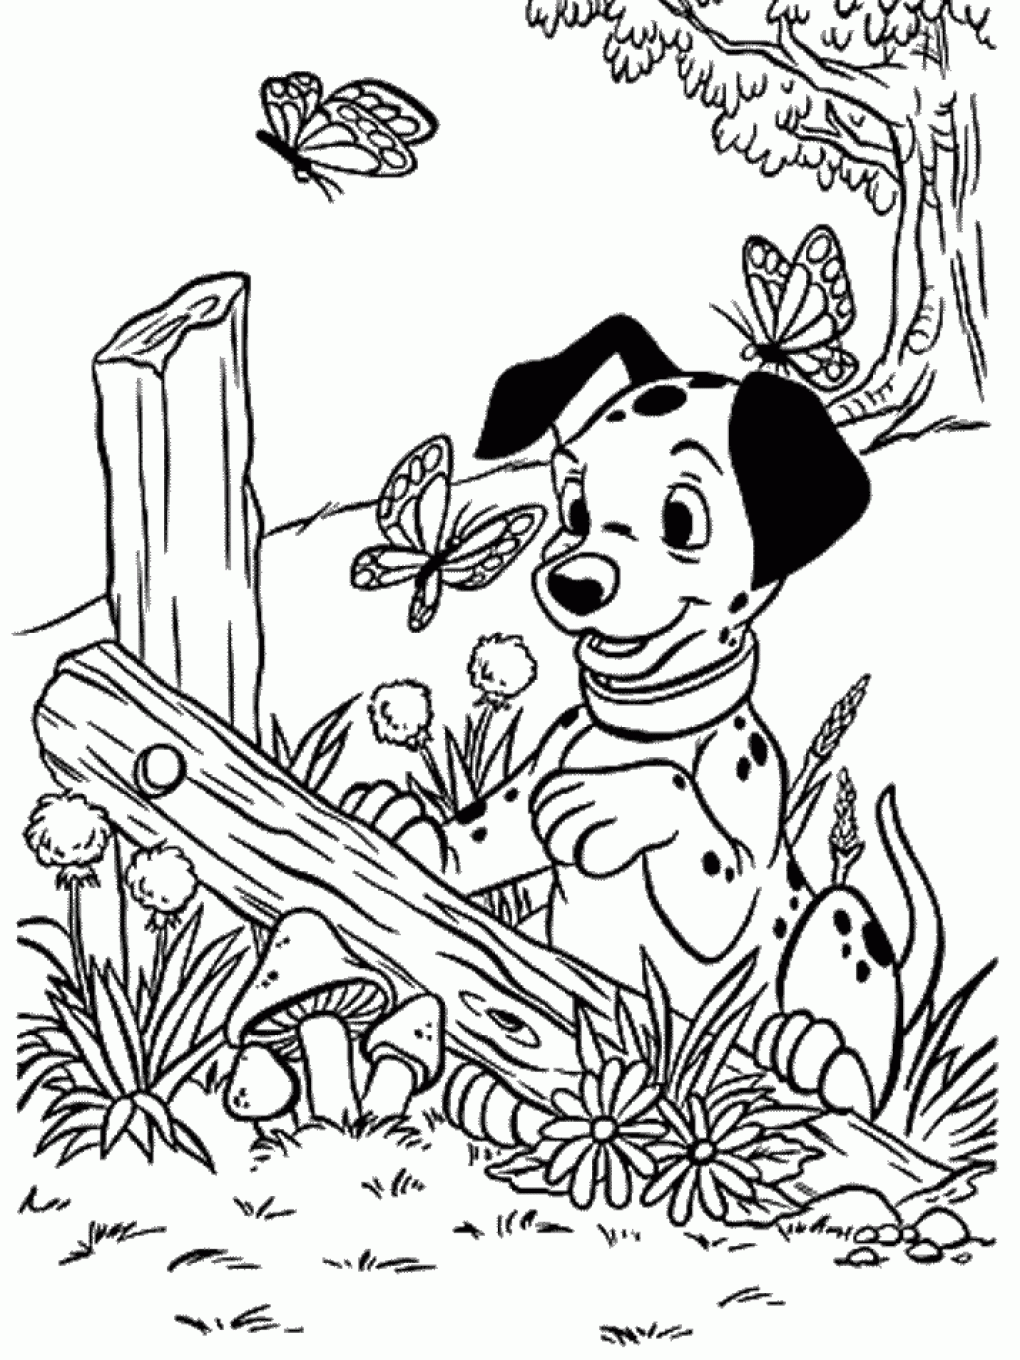 20 dalmatians to print for free   20 Dalmatians Kids Coloring Pages